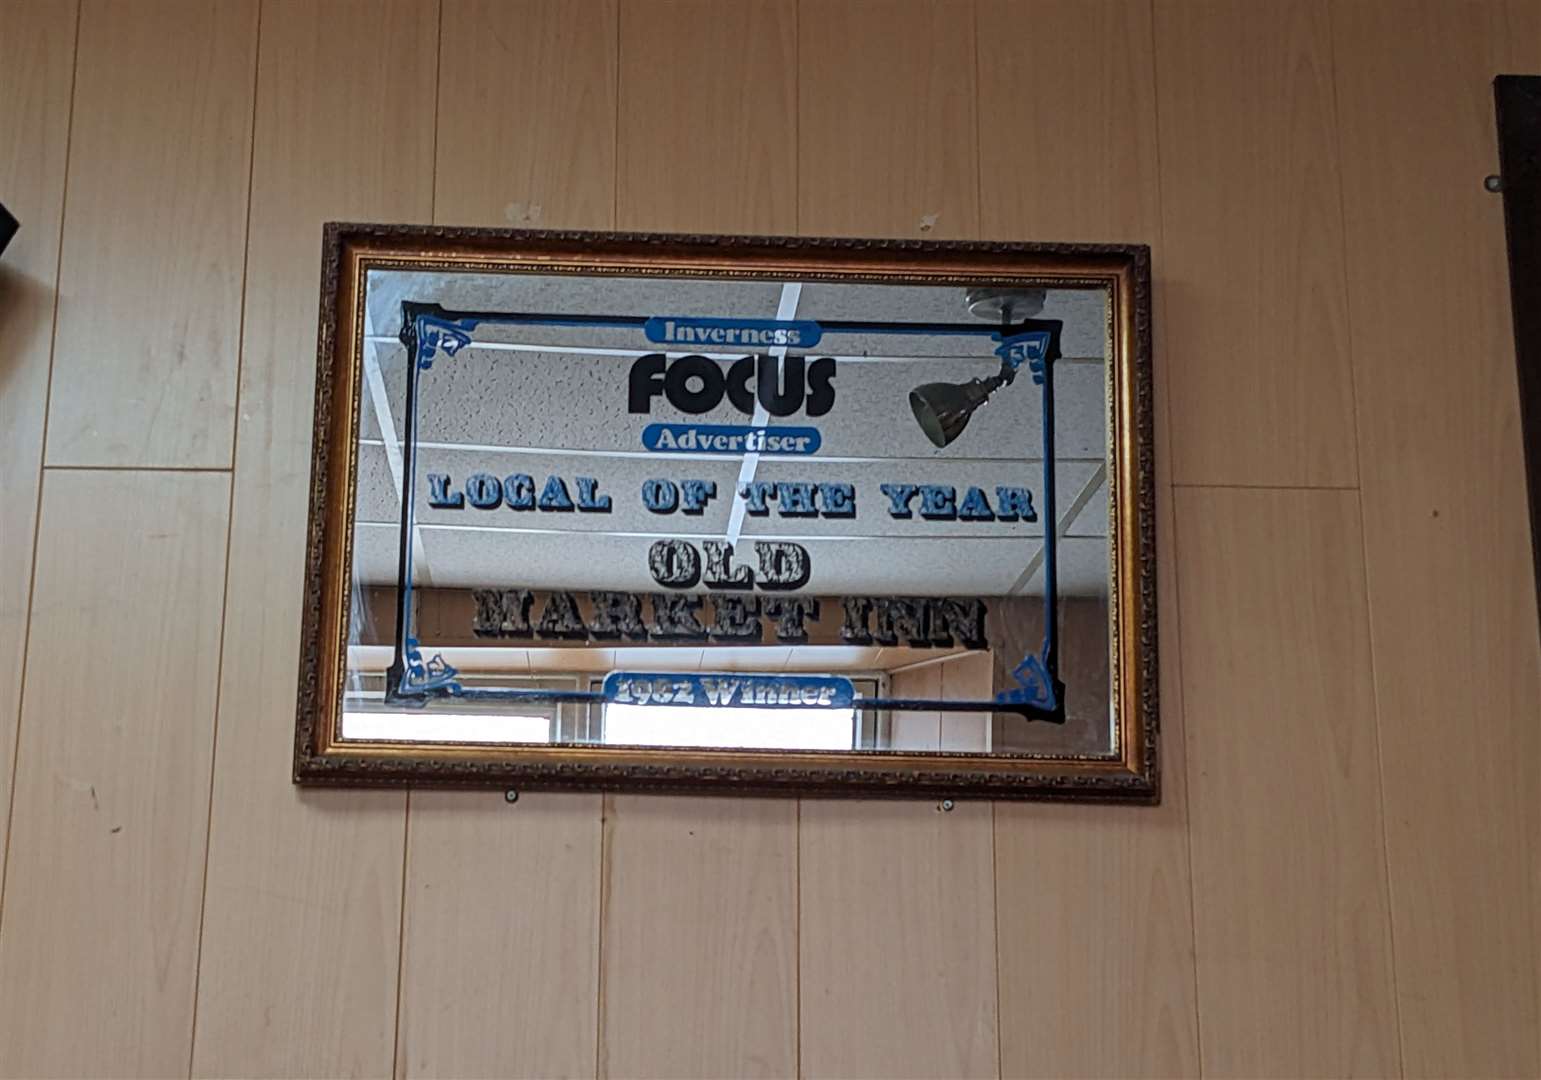 Market Bar: 'Local of the year 1982'